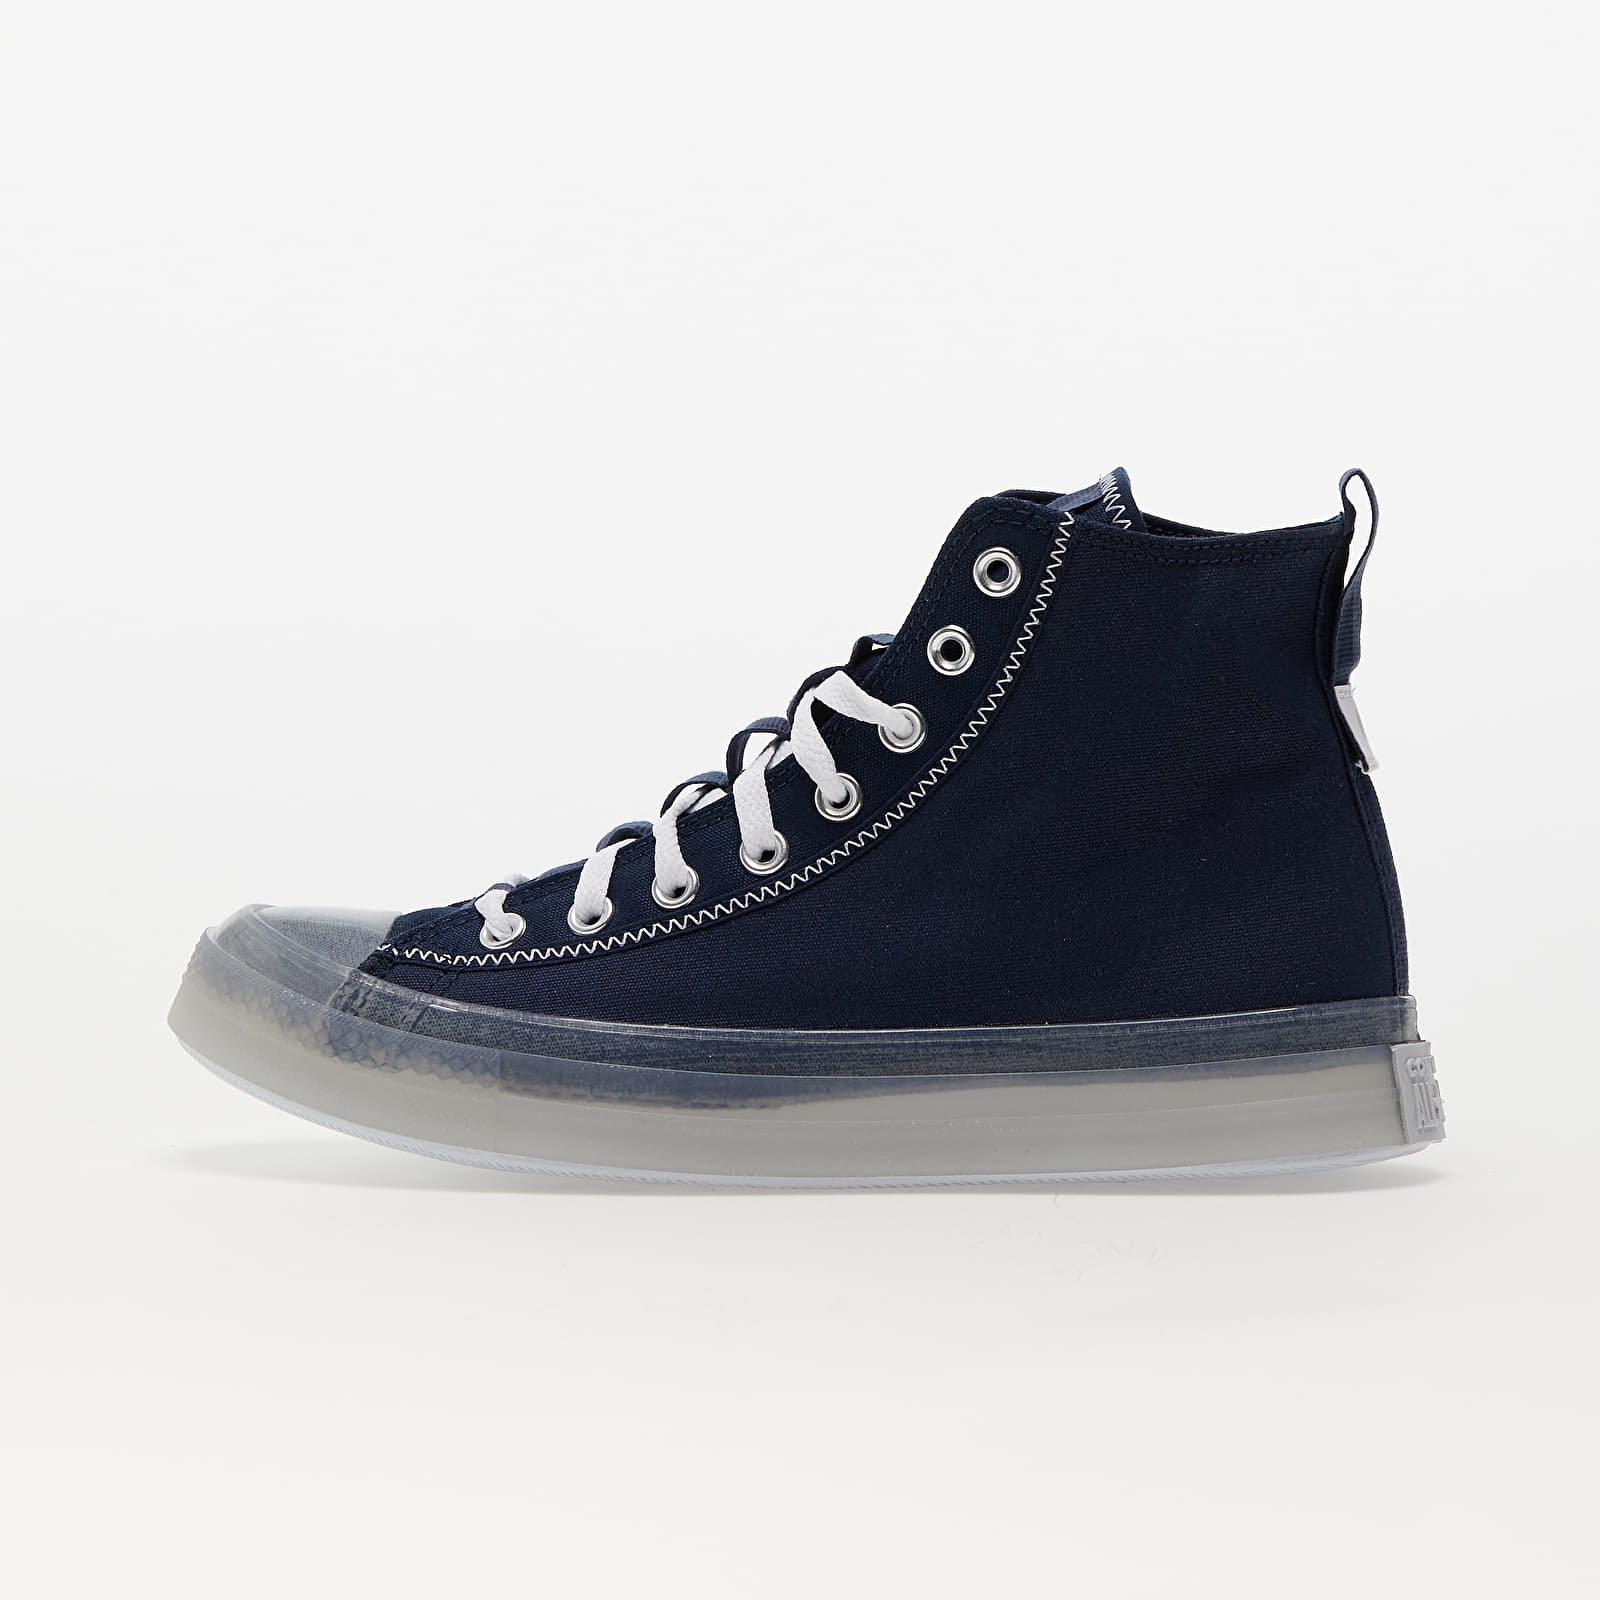 Herensneakers en -schoenen Converse Chuck Taylor All Star CX Explore Obsidian/ White/ Ghosted